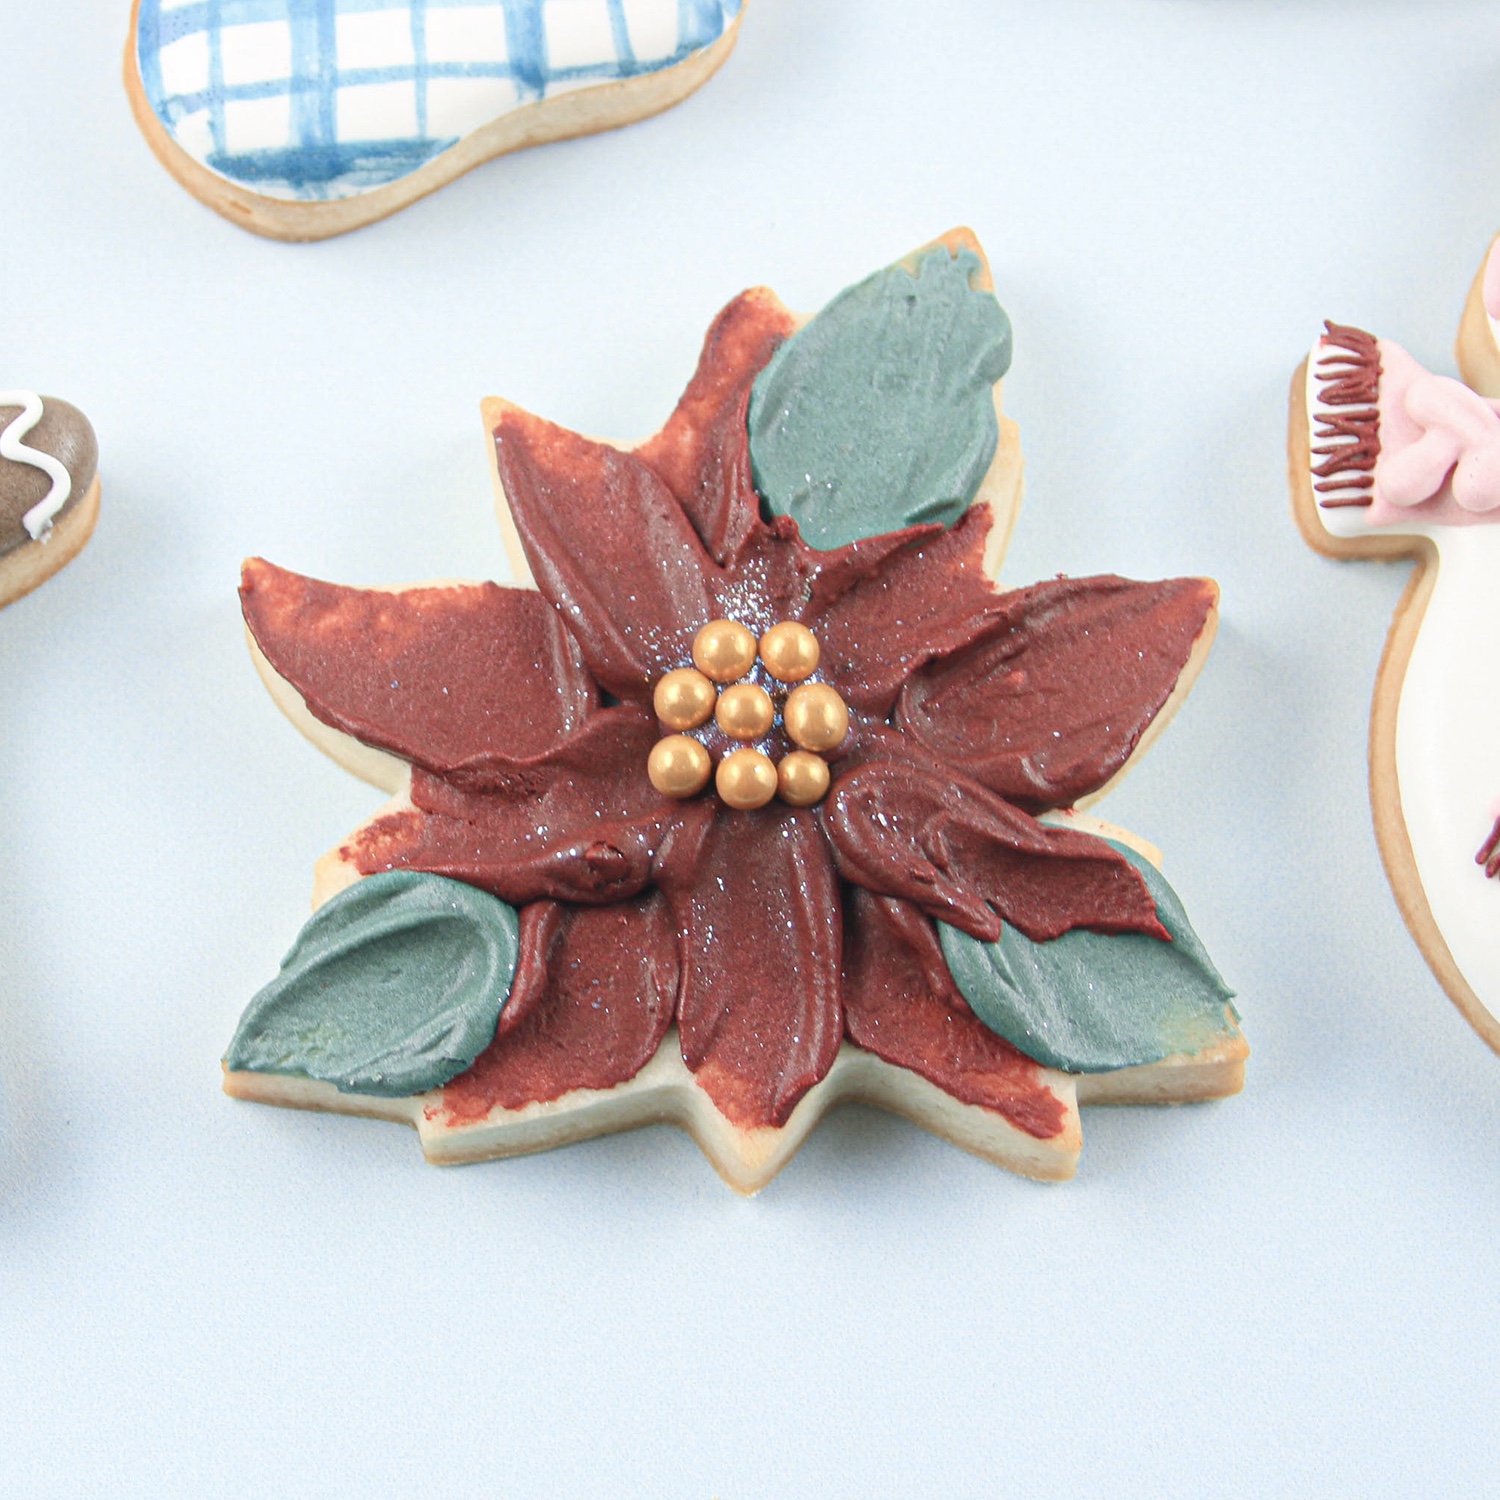 Poinsettia Royal Icing Cookie Decorated with a palette knife and adorned with gold sugar pearls.